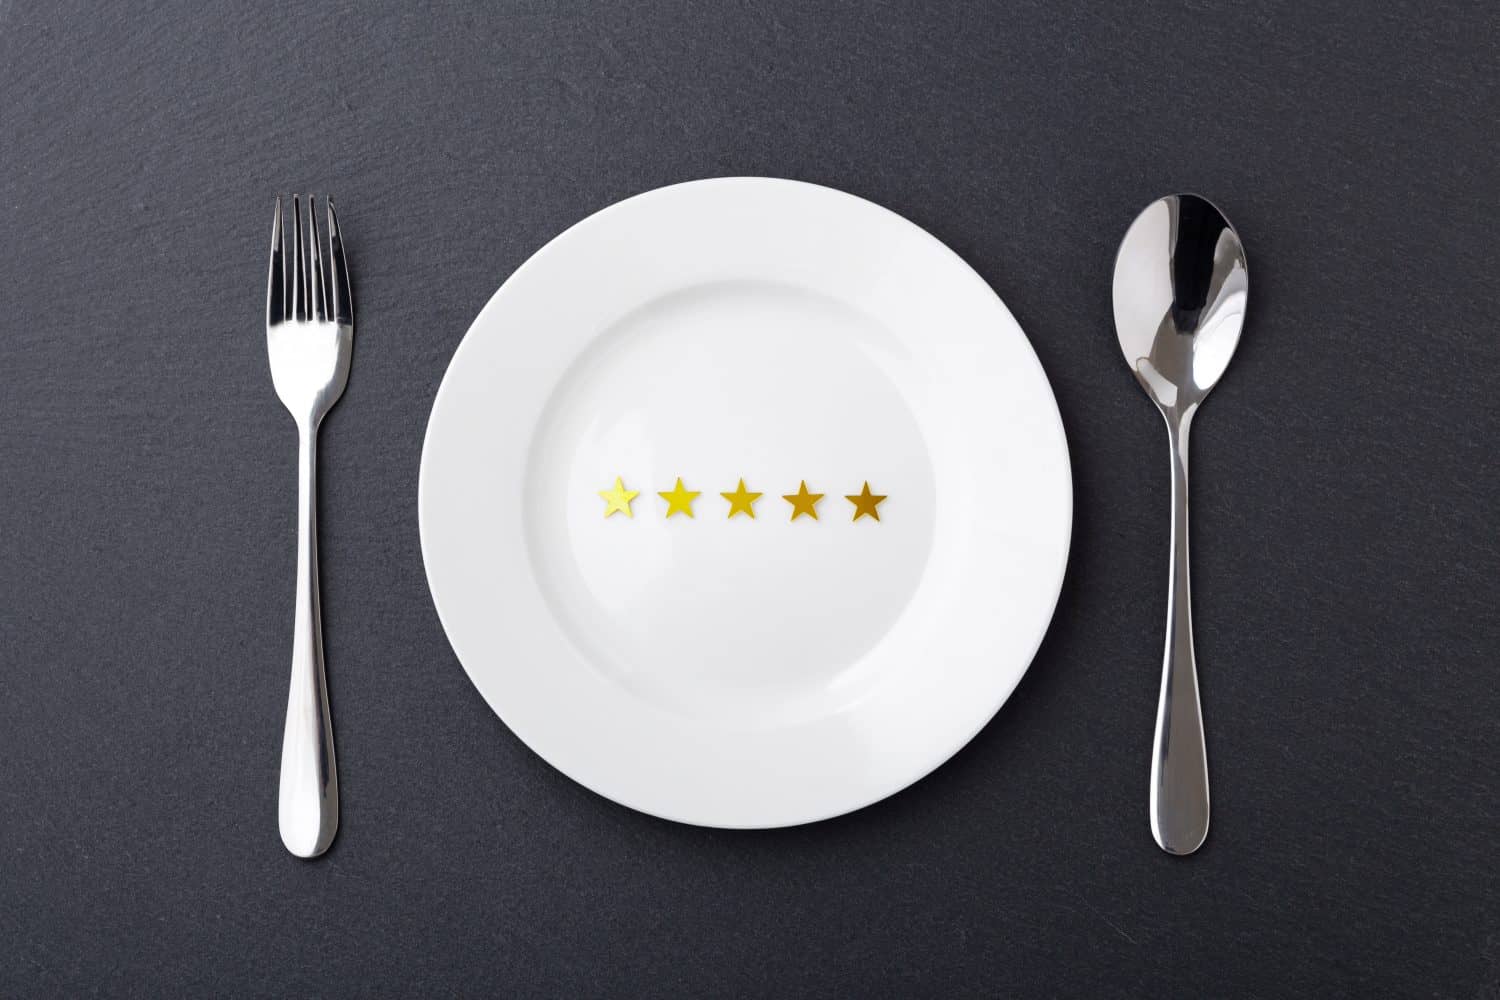 Food and service rating and review concept, five gold star on white plate with fork and spoon on black stone background